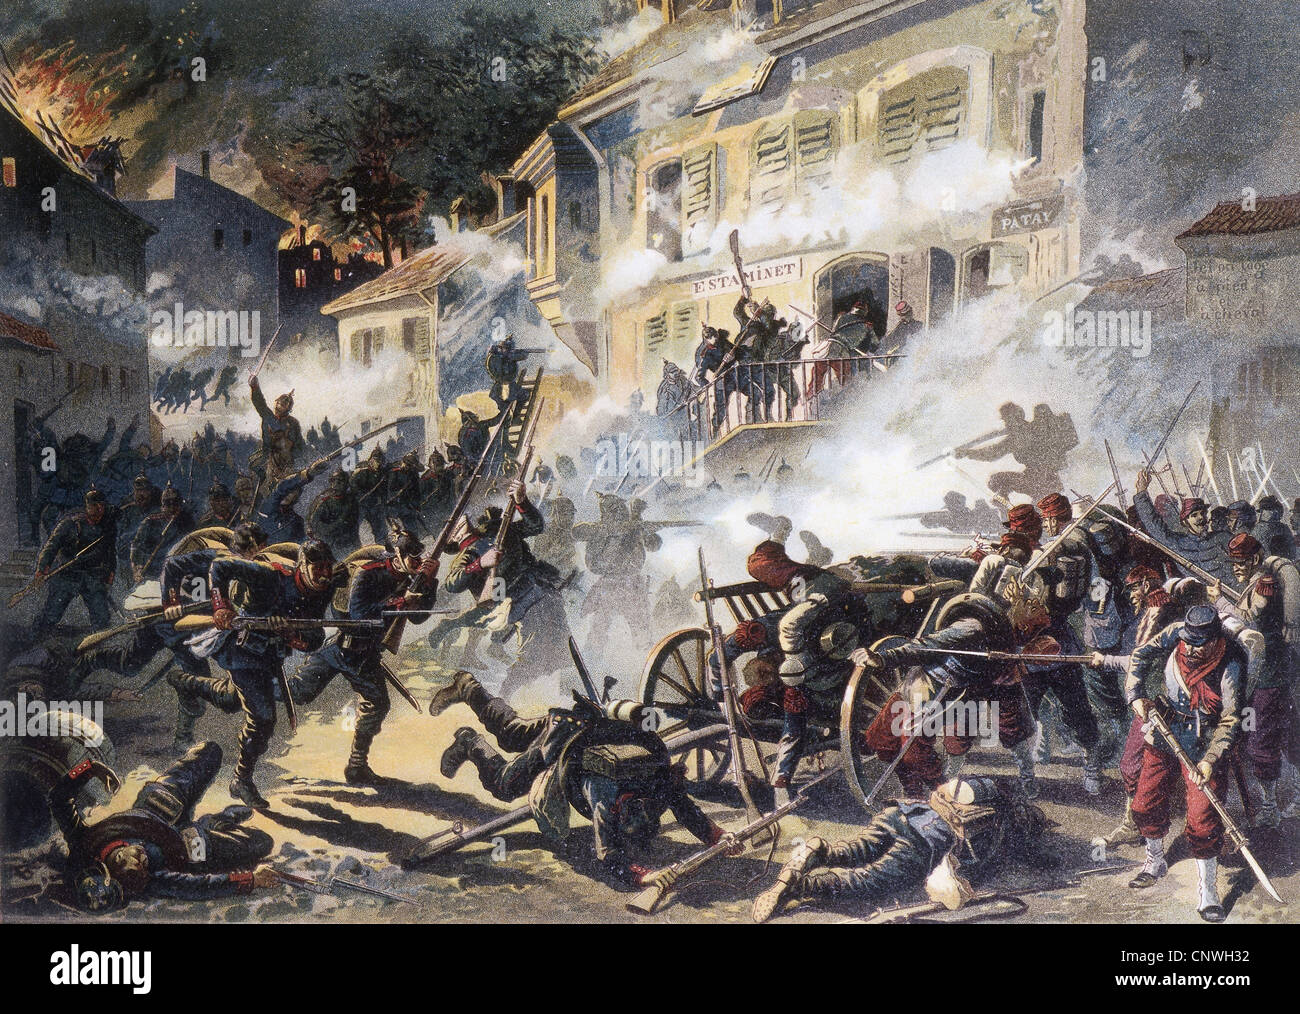 events, Franco-Prussian War 1870 - 1871, Battle of Chateaudun, 18.10.1870, German 43rd Brigade during night combat in the village, chromolithograph after Georg Koch, circa 1895, French Army of the Loire, infantery, soldiers, Hesse, Hessians, urban warfare, night, combat, France, Germany, Franco - Prussian, 19th century, historic, historical, people, Additional-Rights-Clearences-Not Available Stock Photo